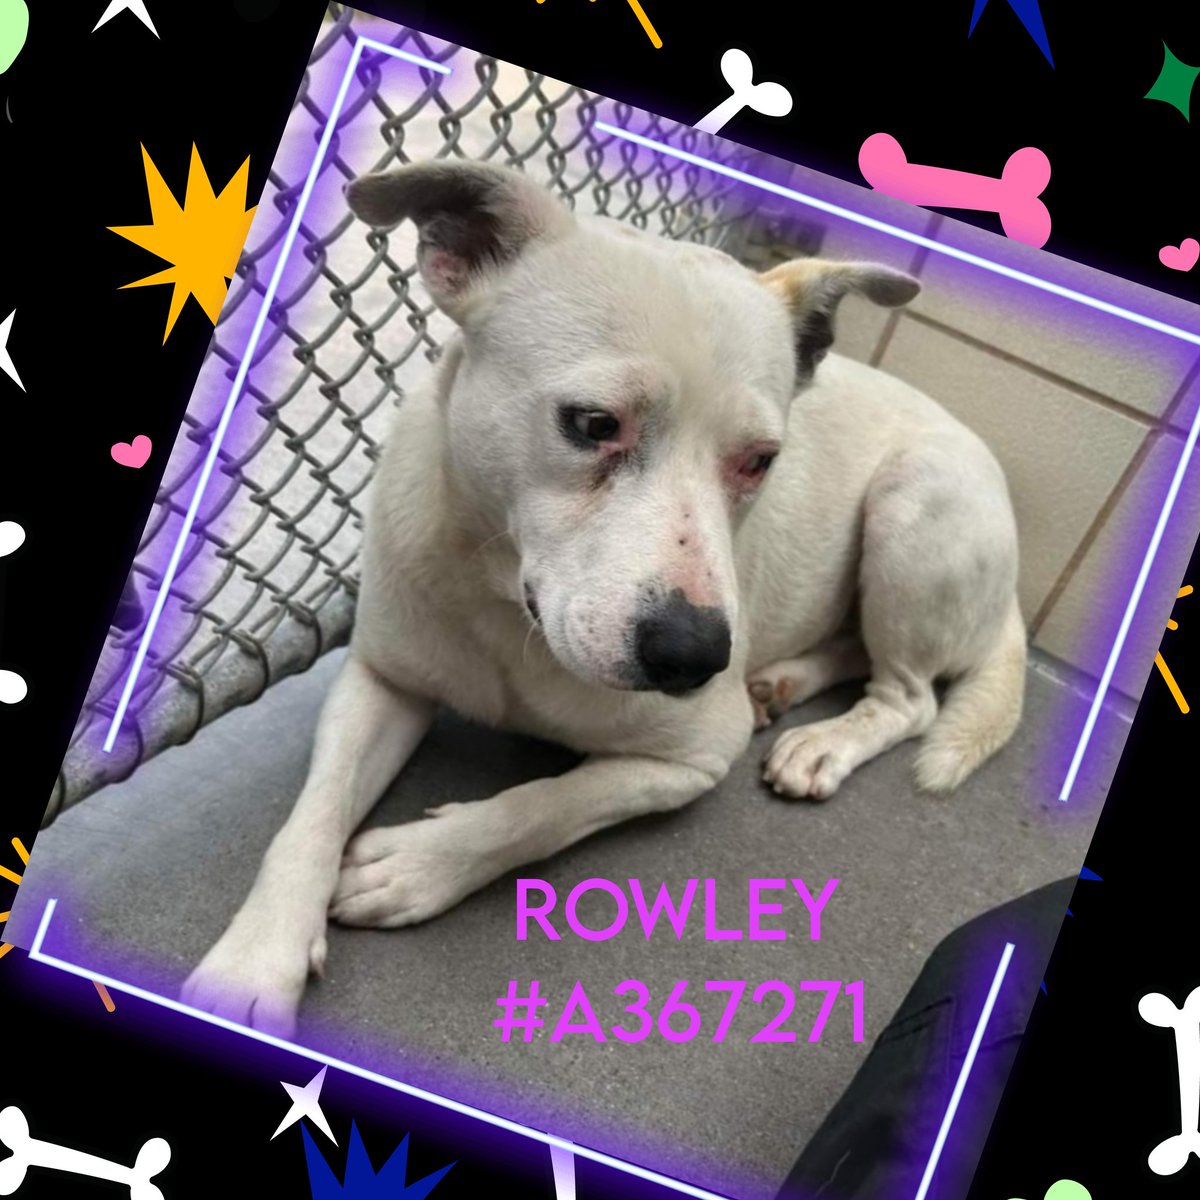 🆘️🚨URGENT 🚨ROWLEY #A367271 Life has not been kind to sweet scared boy. 3 yo #pibbleMix 
Came to #CorpusChristiACS #TX w housemate ARLO, die together 5/6💔🤬b/c #CorpusChristi #TX doesn't tolerate #HomelessDogs. Fearful but HW neg,  someone maybe cared enough for prevention…